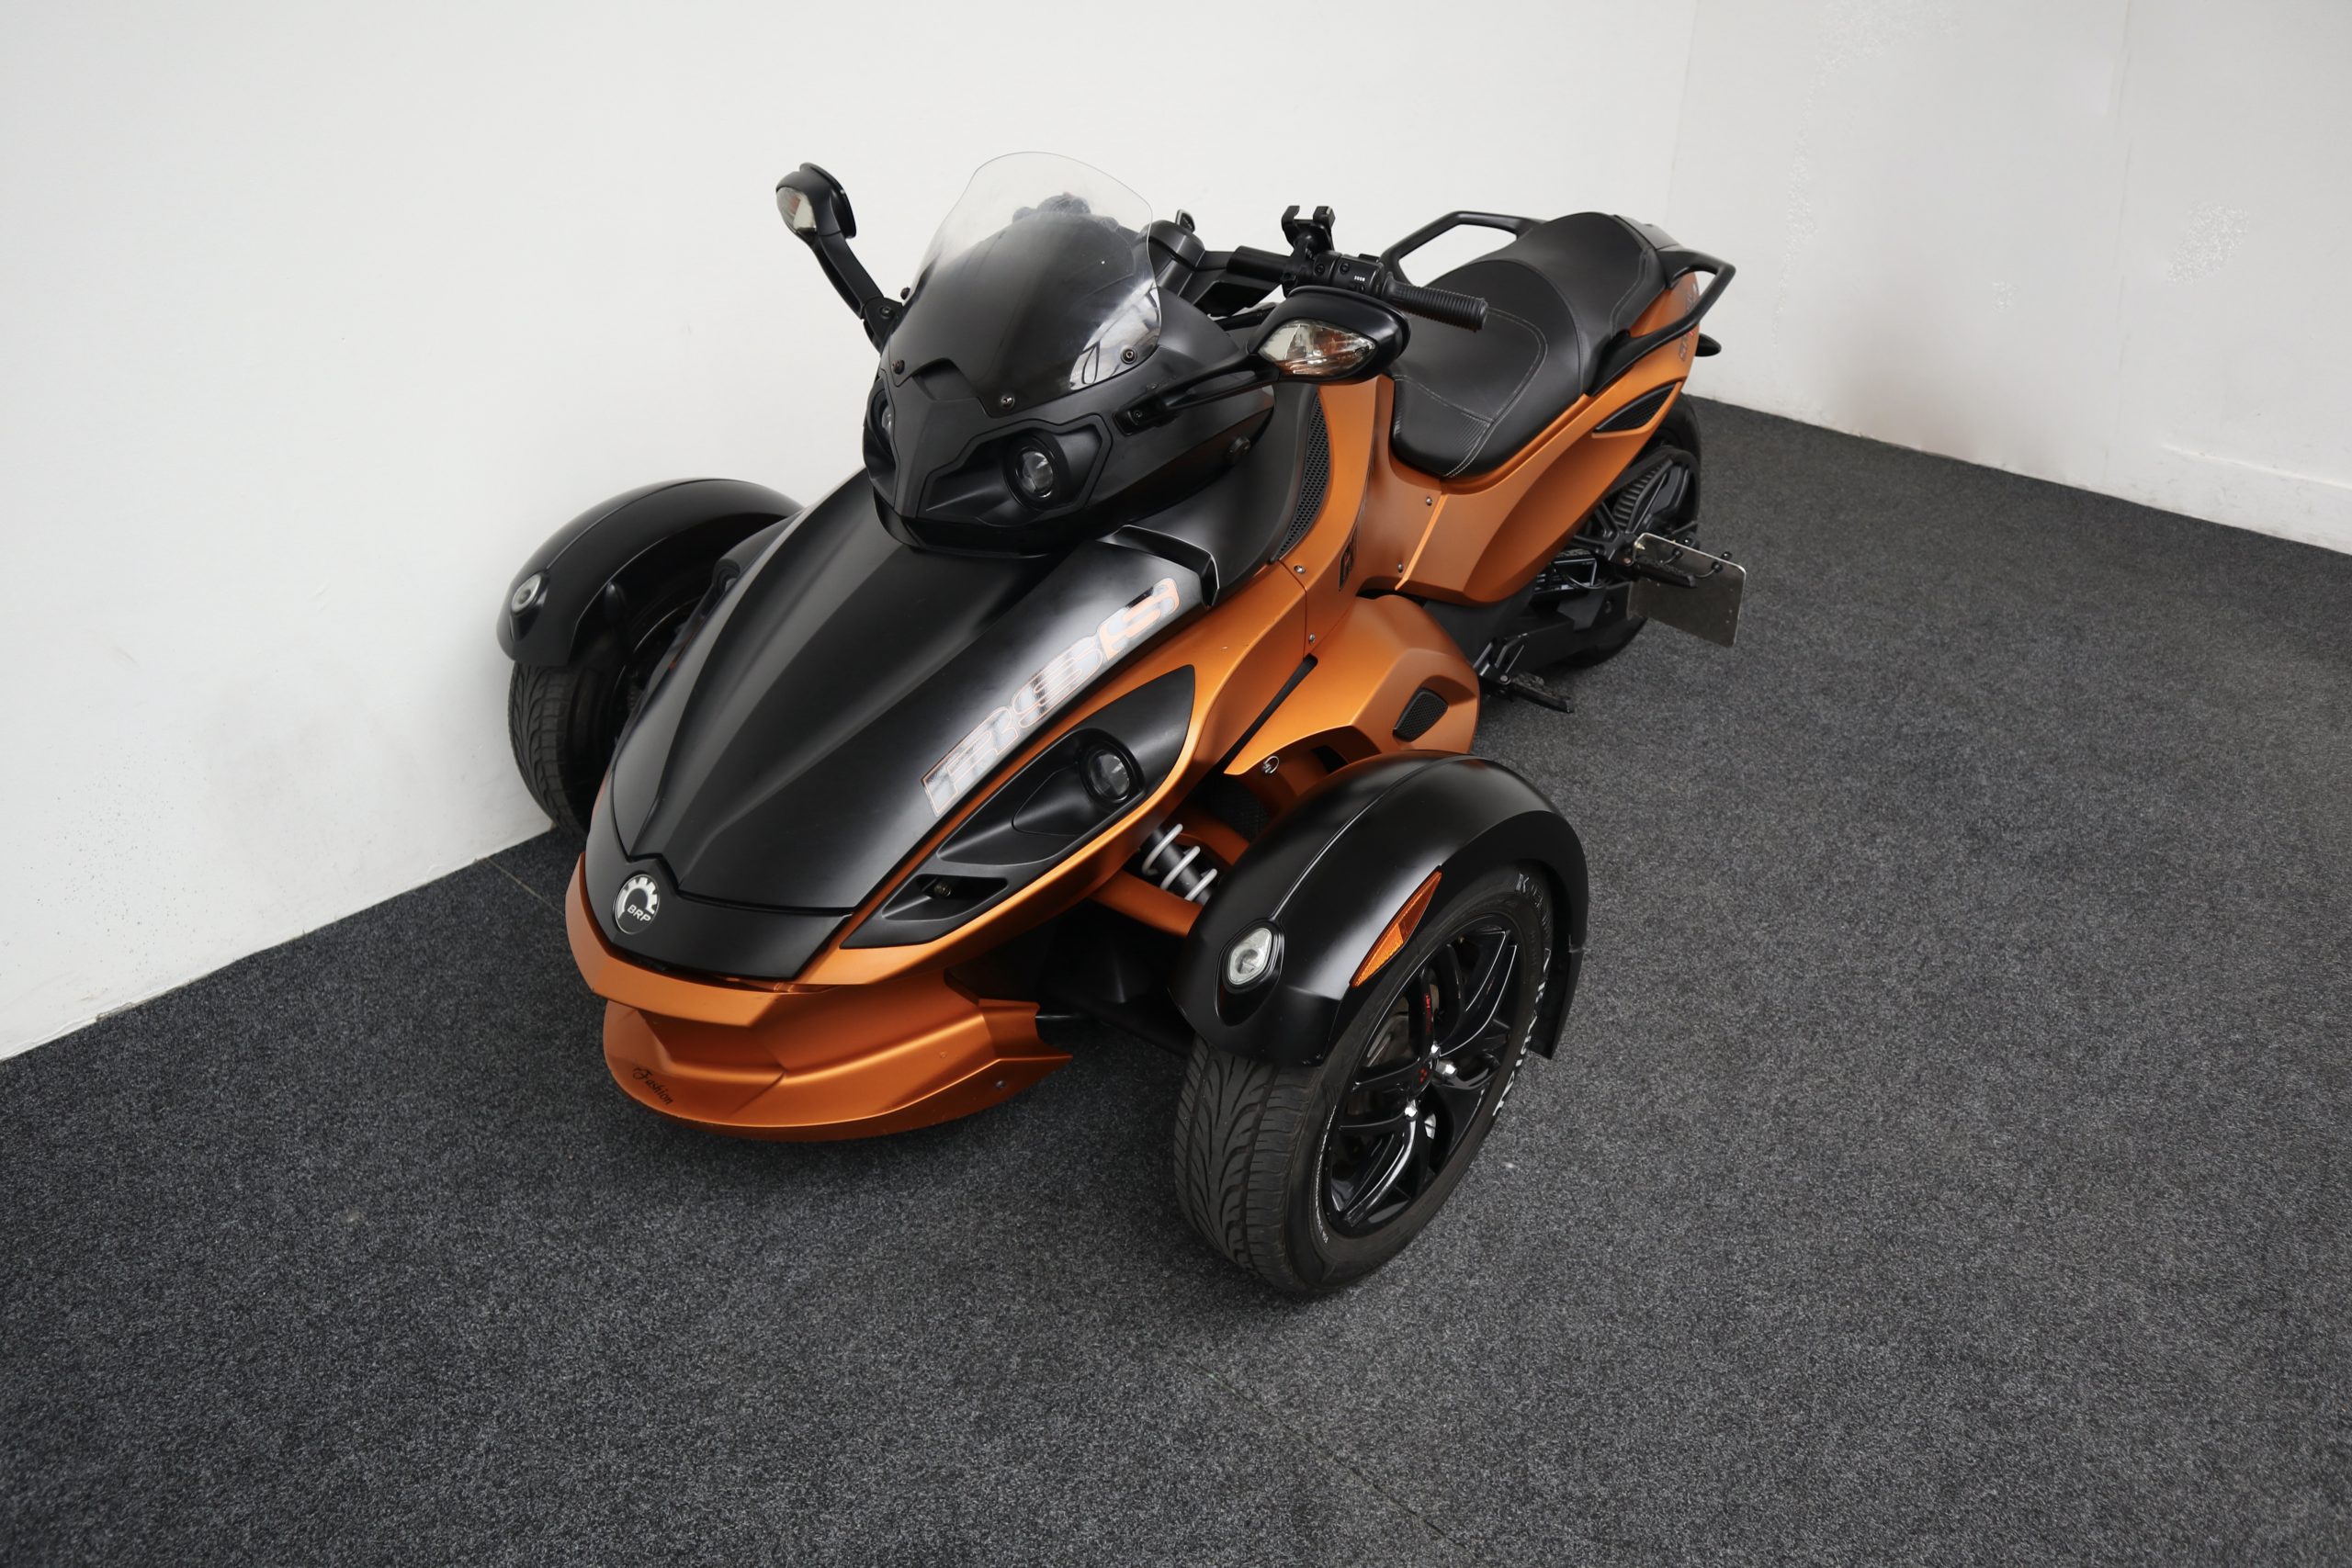 Can-Am Spyder RS Roadster